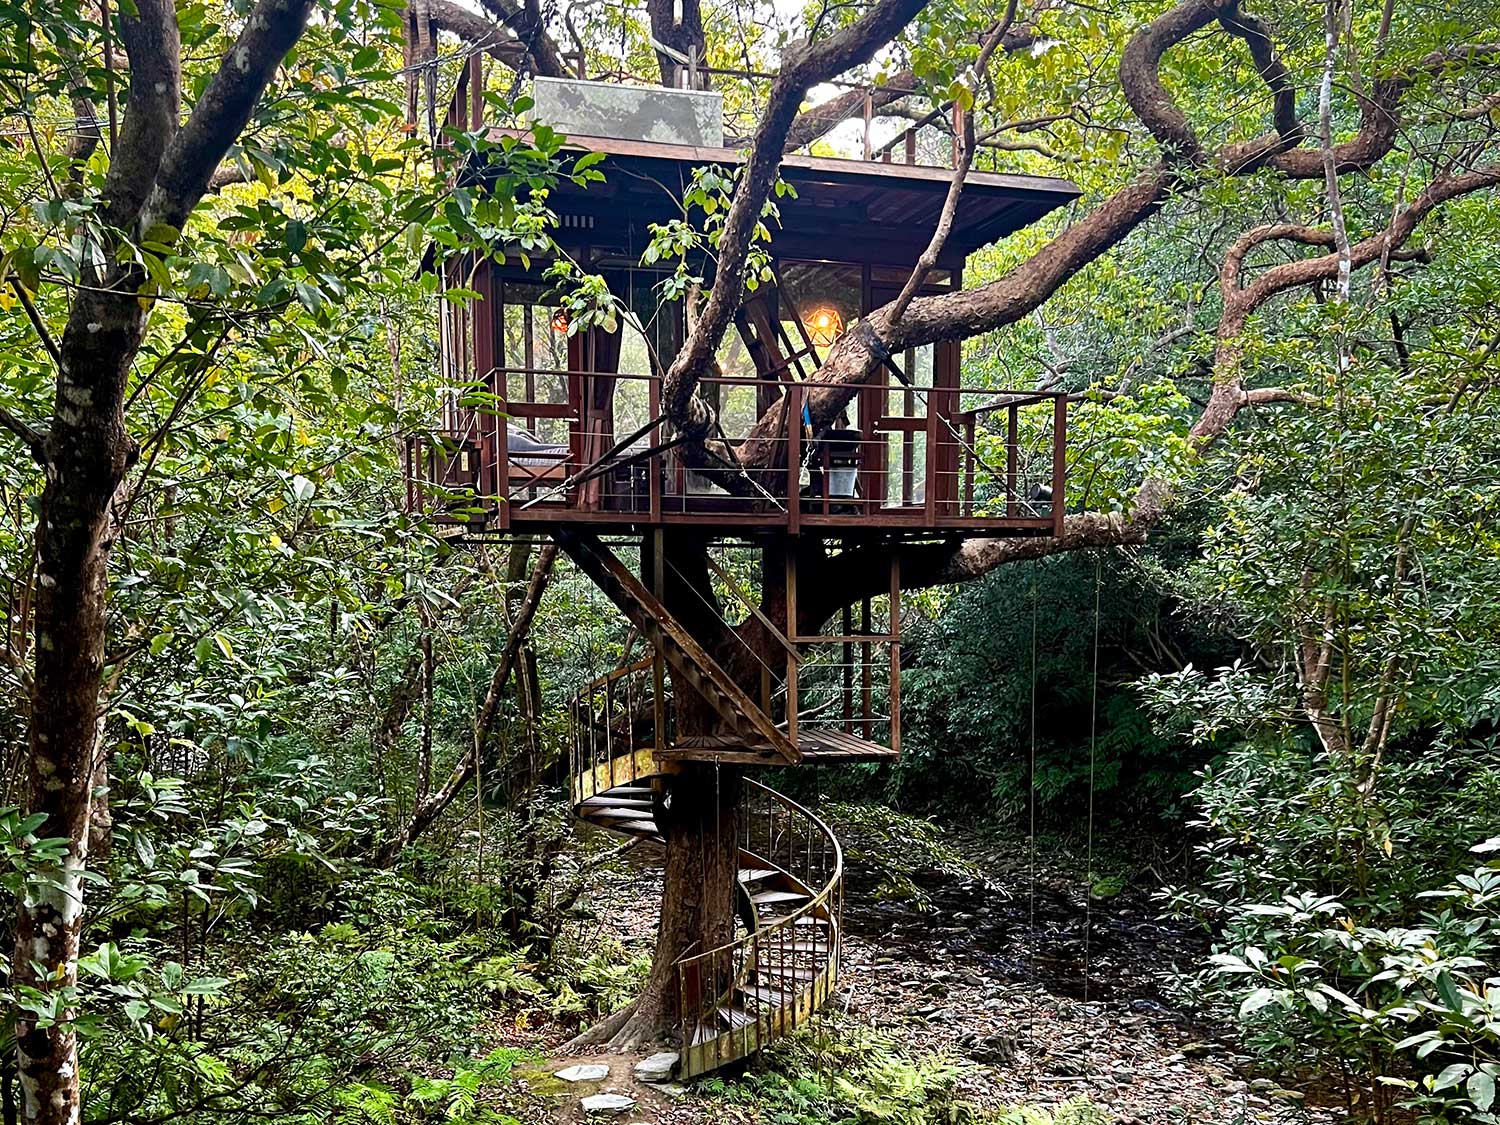 The spiral treehouse is one of four accommodations at the Treeful Treehouse in Okinawa, Japan.